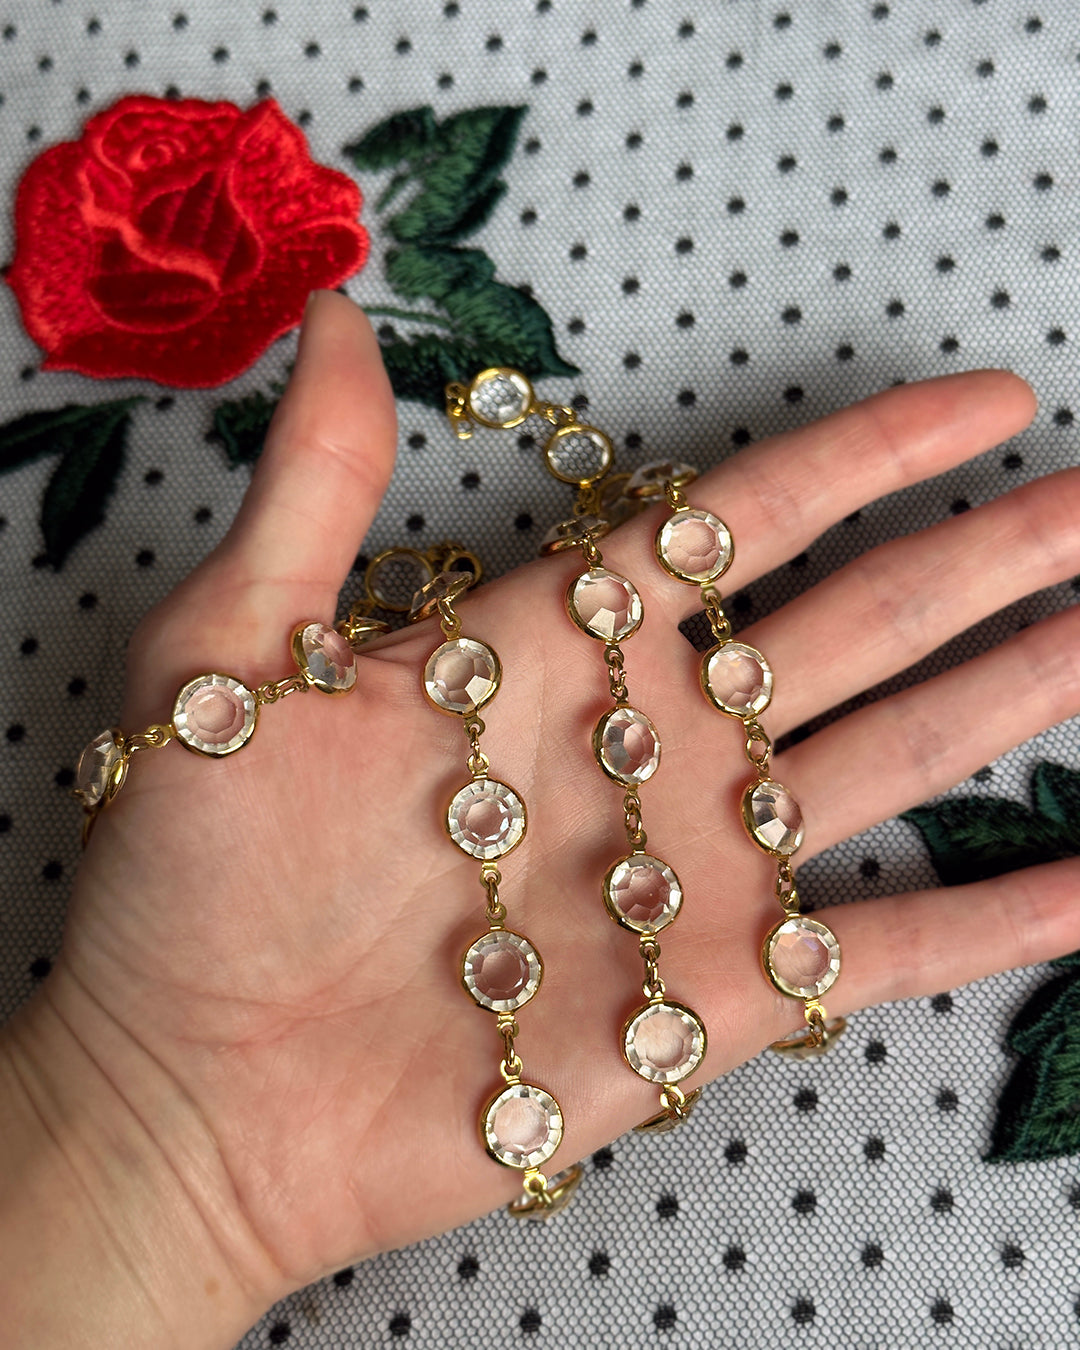 GEORGIAN STYLE ROSE-CUT RIVIERE NECKLACE